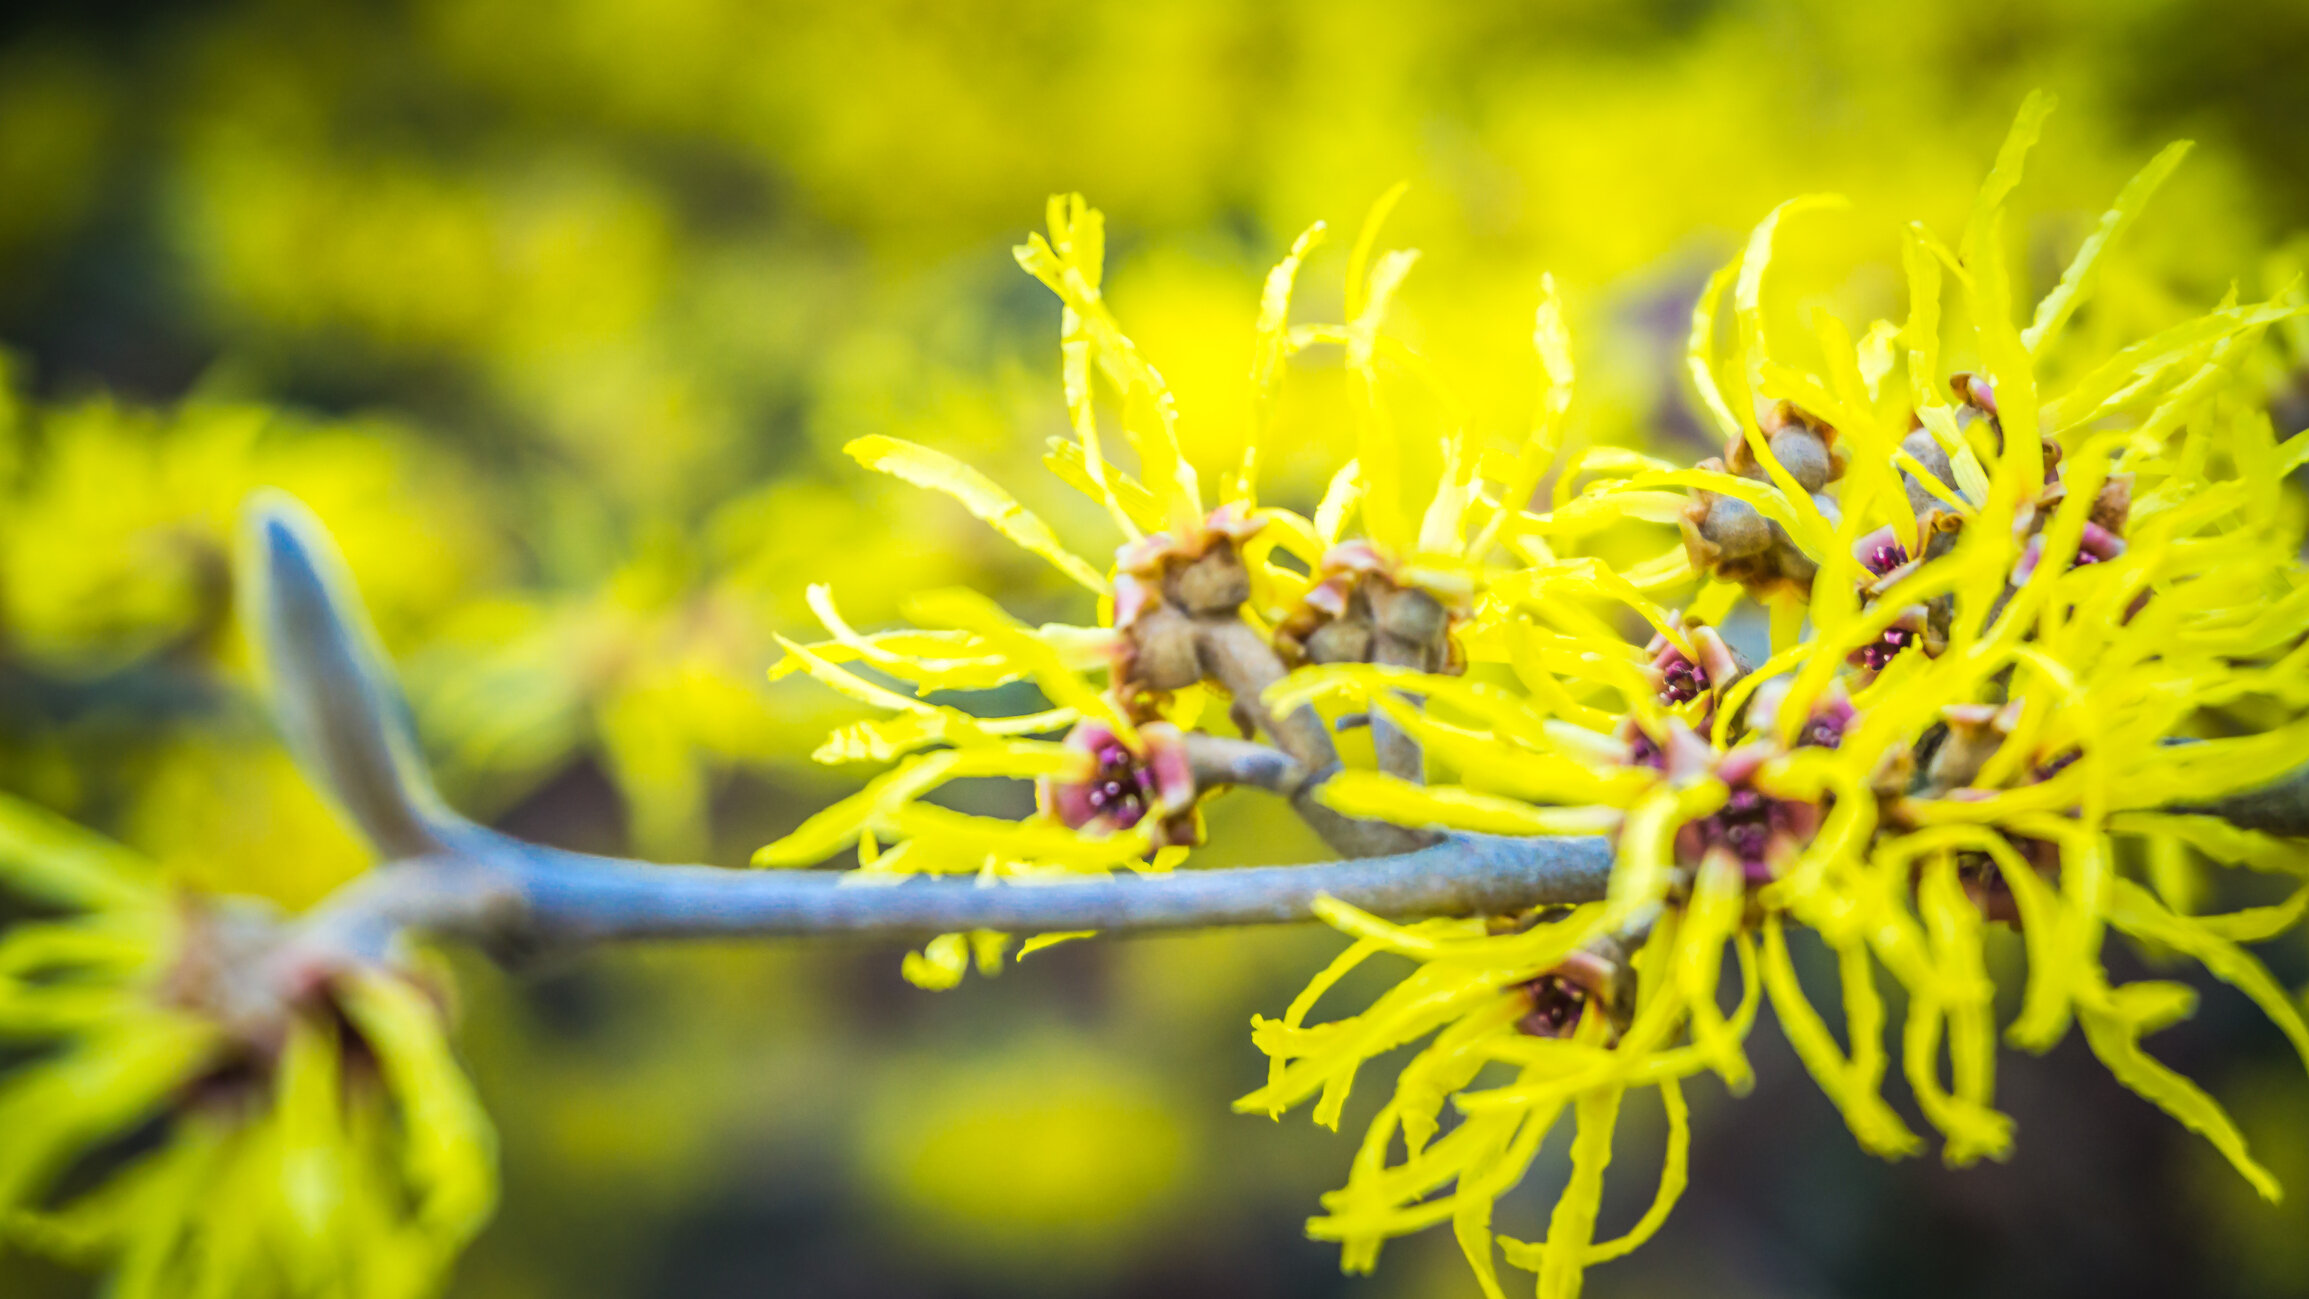 Witch Hazel trees begin blooming in January and their bright, sulfur yellow (or red-orange for some cultivars) are a welcome sight for sore eyes itching for color. Their small size 20’ x 15’ mean you don’t need a lot of room to tuck one of these in, just make sure it’s full sun.